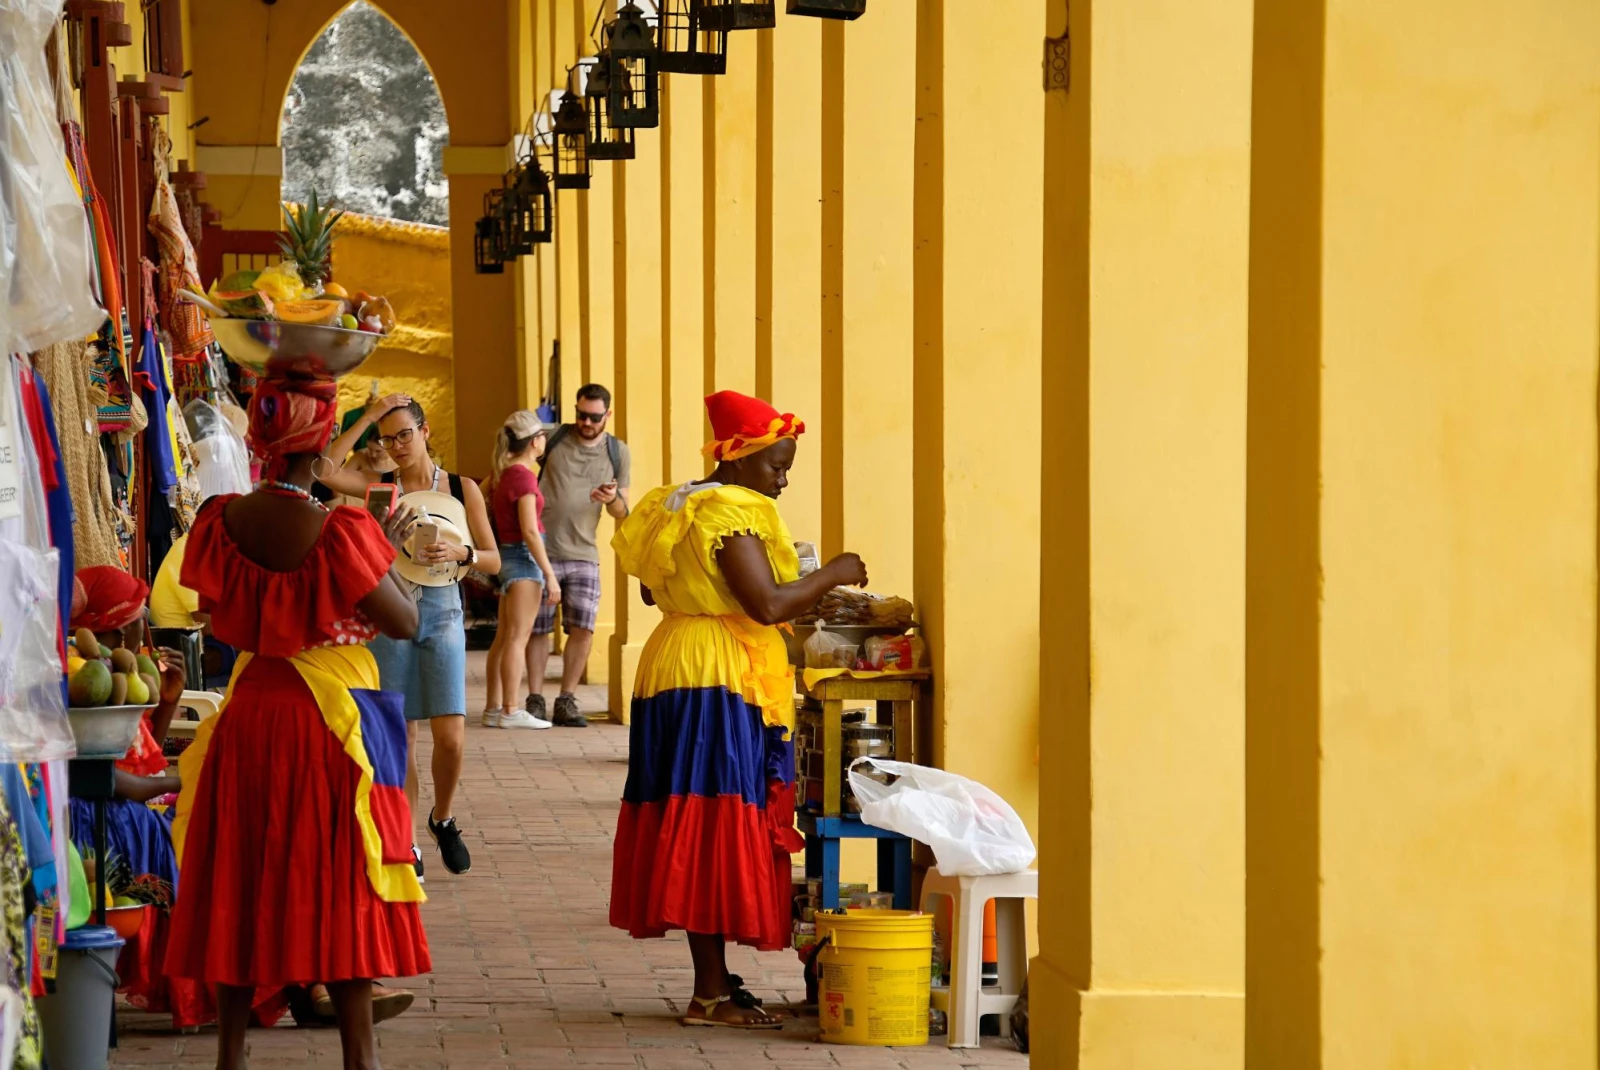 a street lined with yellow columns with various market stalls and women dressed in brightly colored dresses